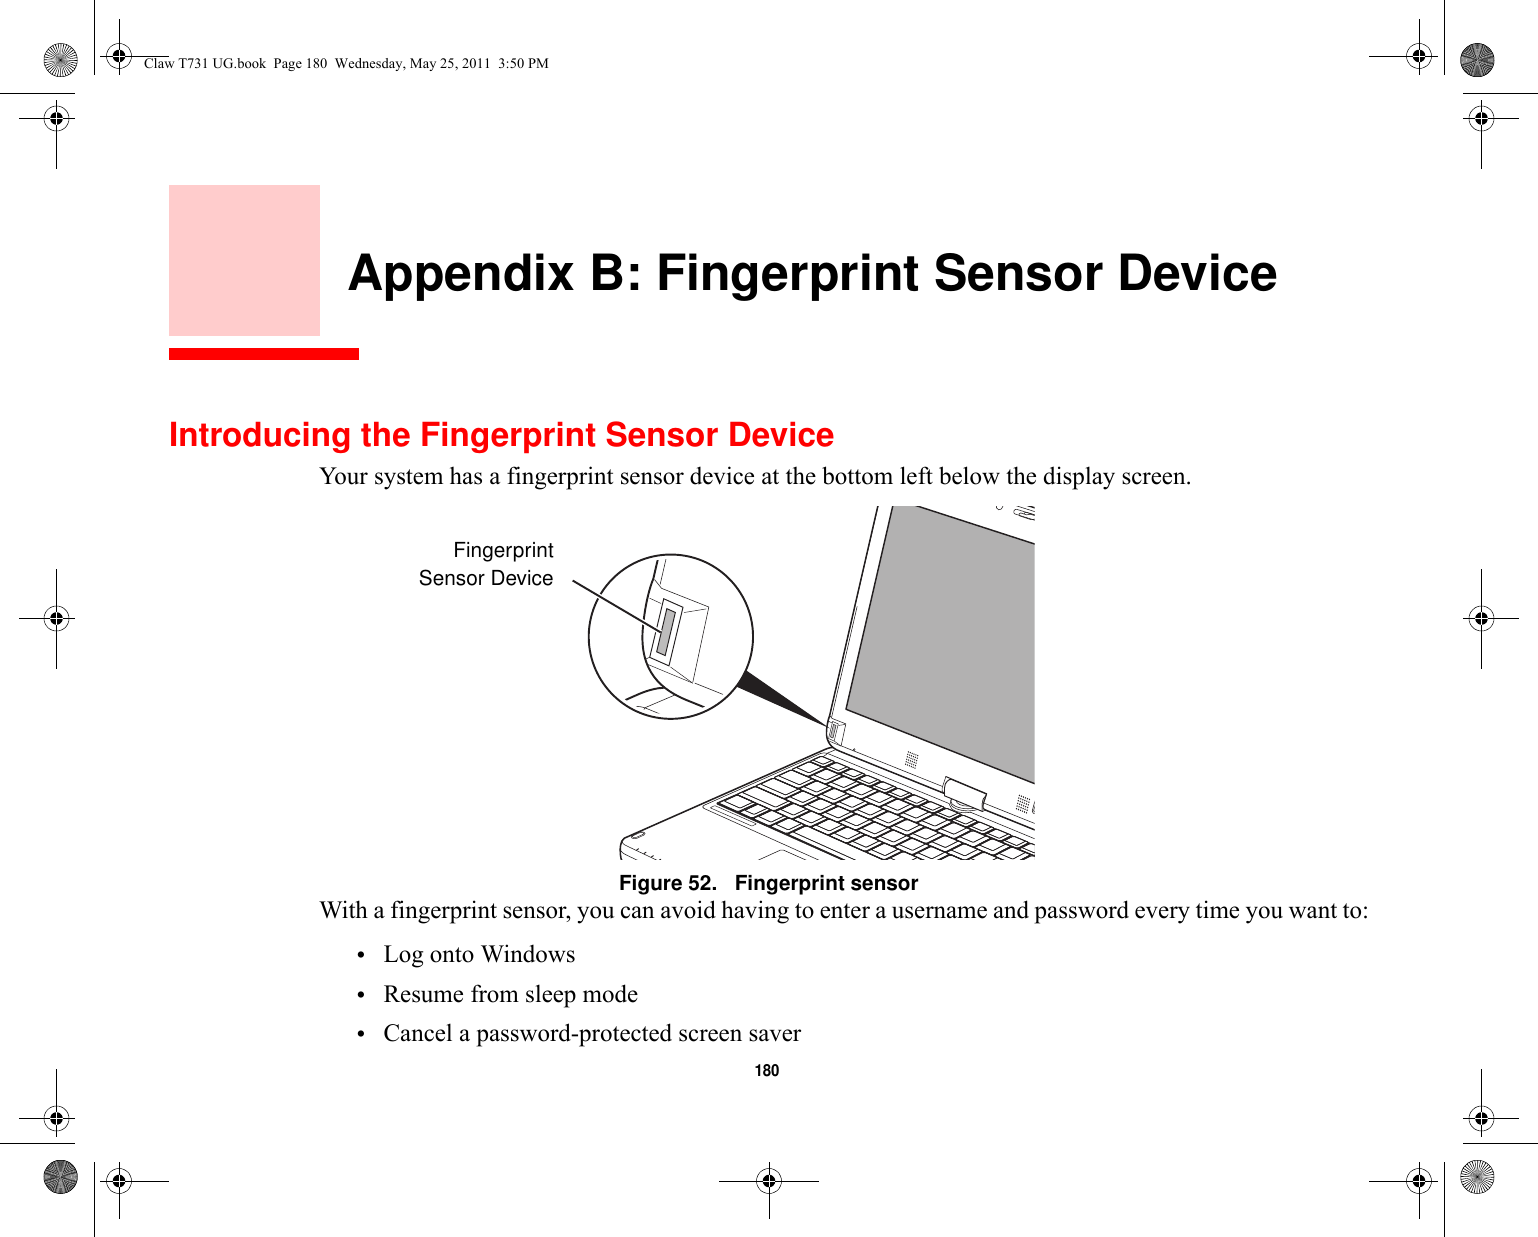 180     Appendix B: Fingerprint Sensor DeviceIntroducing the Fingerprint Sensor DeviceYour system has a fingerprint sensor device at the bottom left below the display screen. Figure 52.   Fingerprint sensorWith a fingerprint sensor, you can avoid having to enter a username and password every time you want to:•Log onto Windows•Resume from sleep mode•Cancel a password-protected screen saverFingerprintSensor DeviceClaw T731 UG.book  Page 180  Wednesday, May 25, 2011  3:50 PM